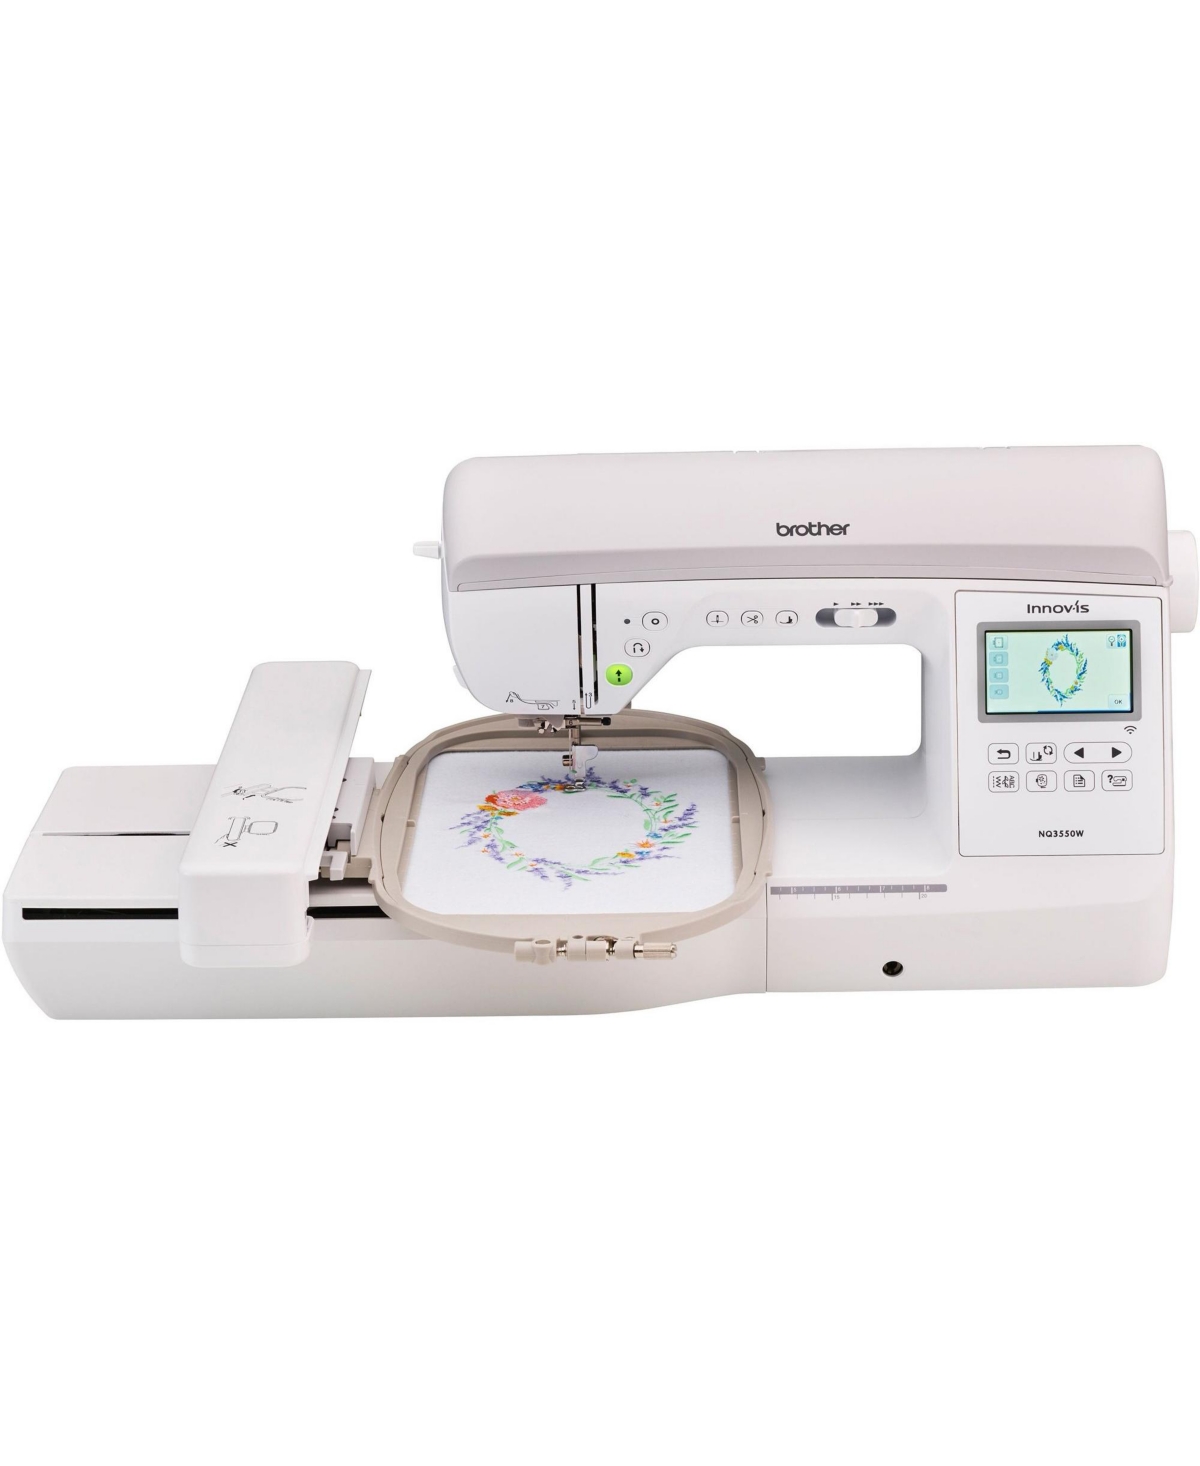 NQ3550W 10" x 6" Computerized Sewing and Embroidery Machine - White